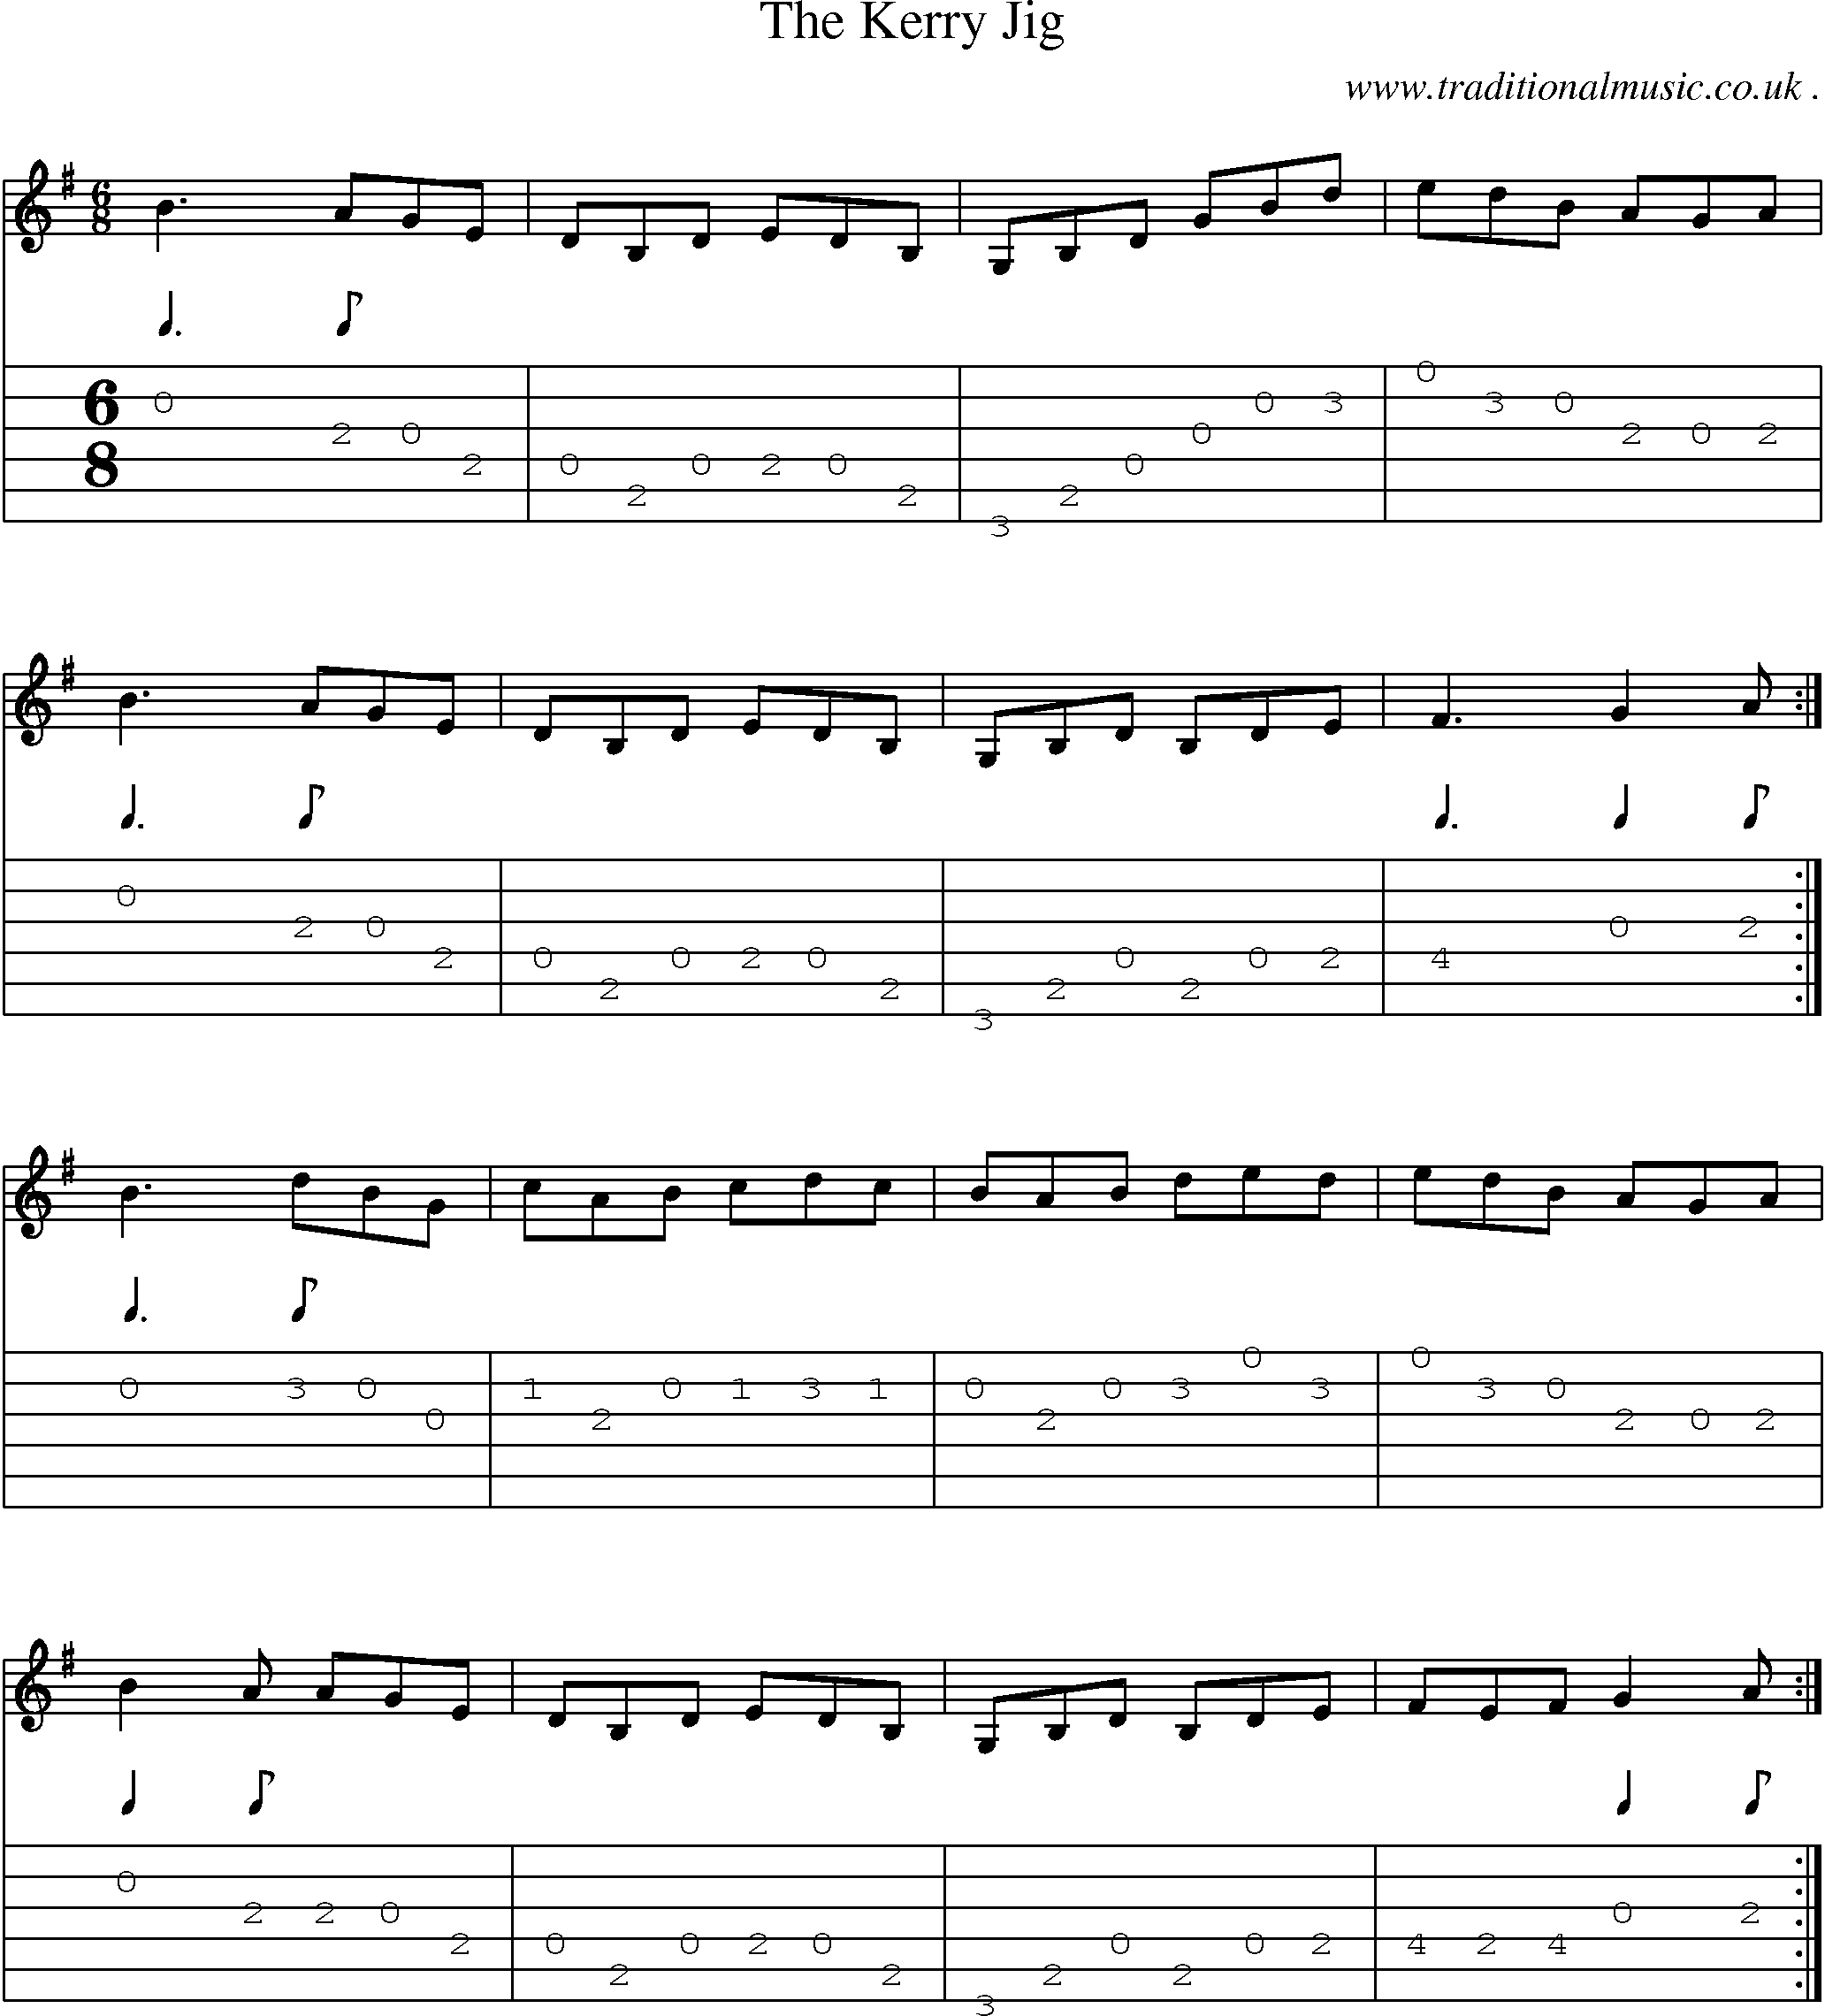 Sheet-Music and Guitar Tabs for The Kerry Jig